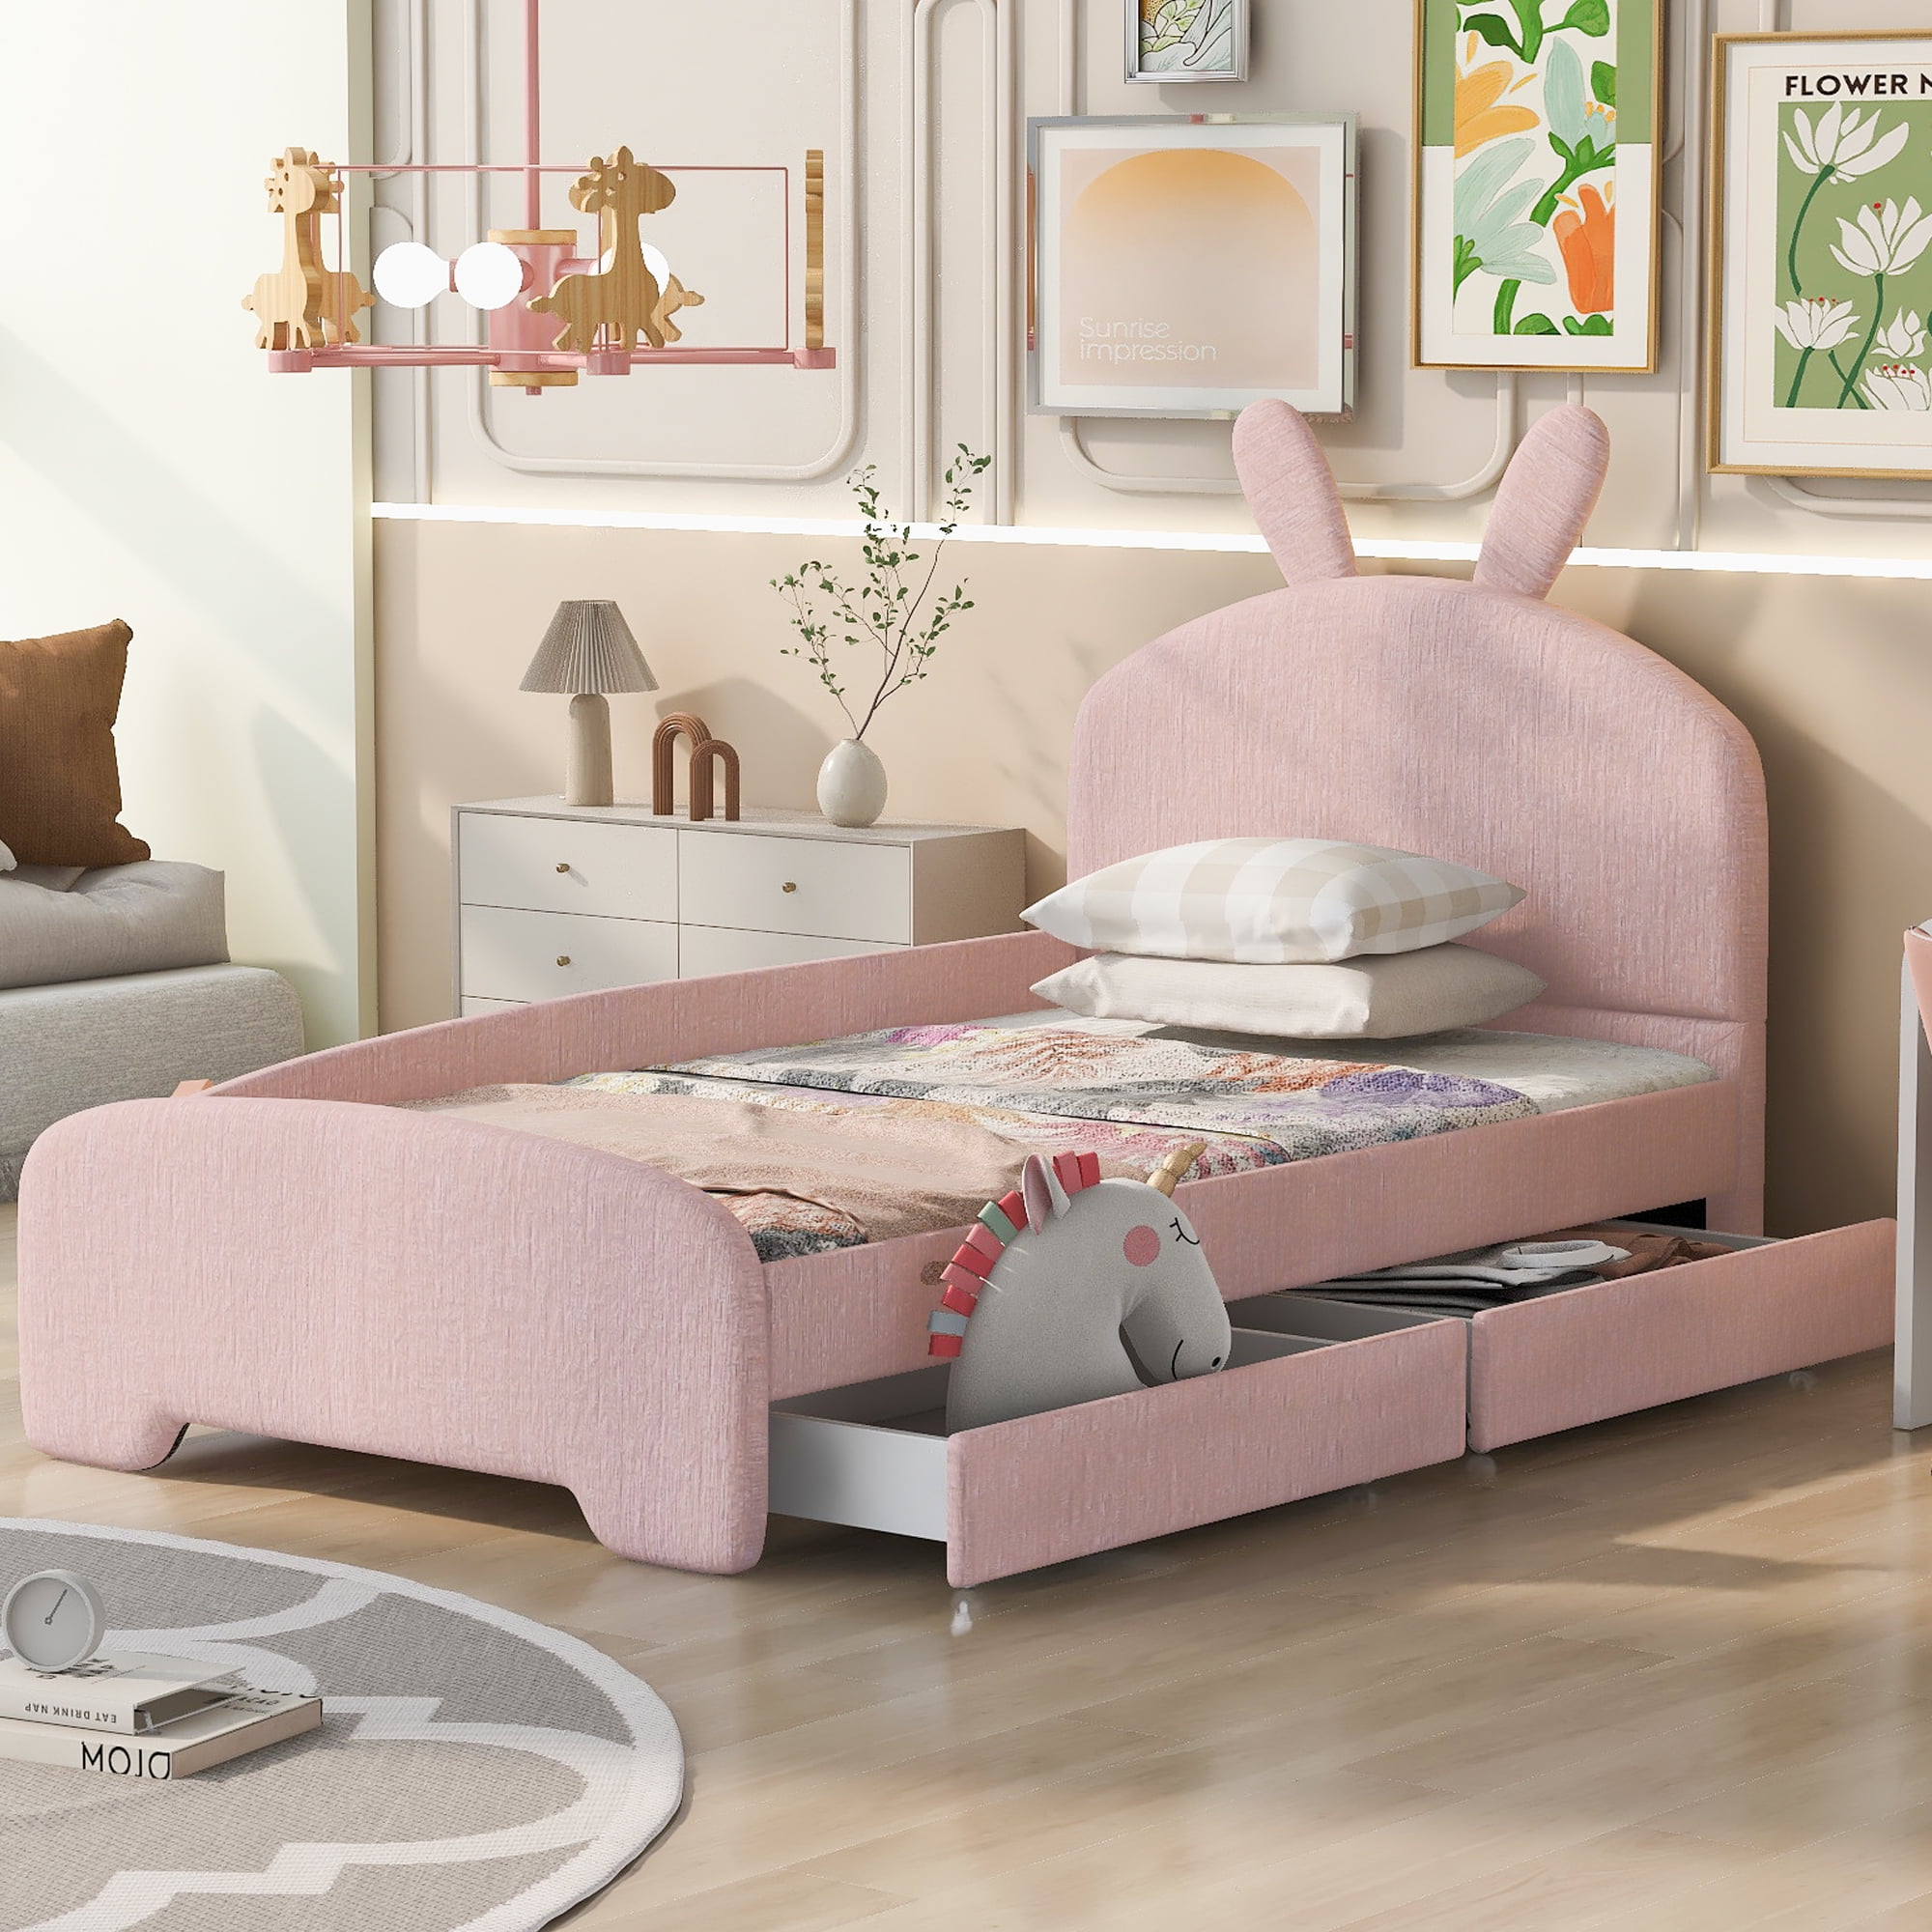 Euroco Upholstery Twin Size Platform Bed, Bunny-Shaped Bed with 2 ...